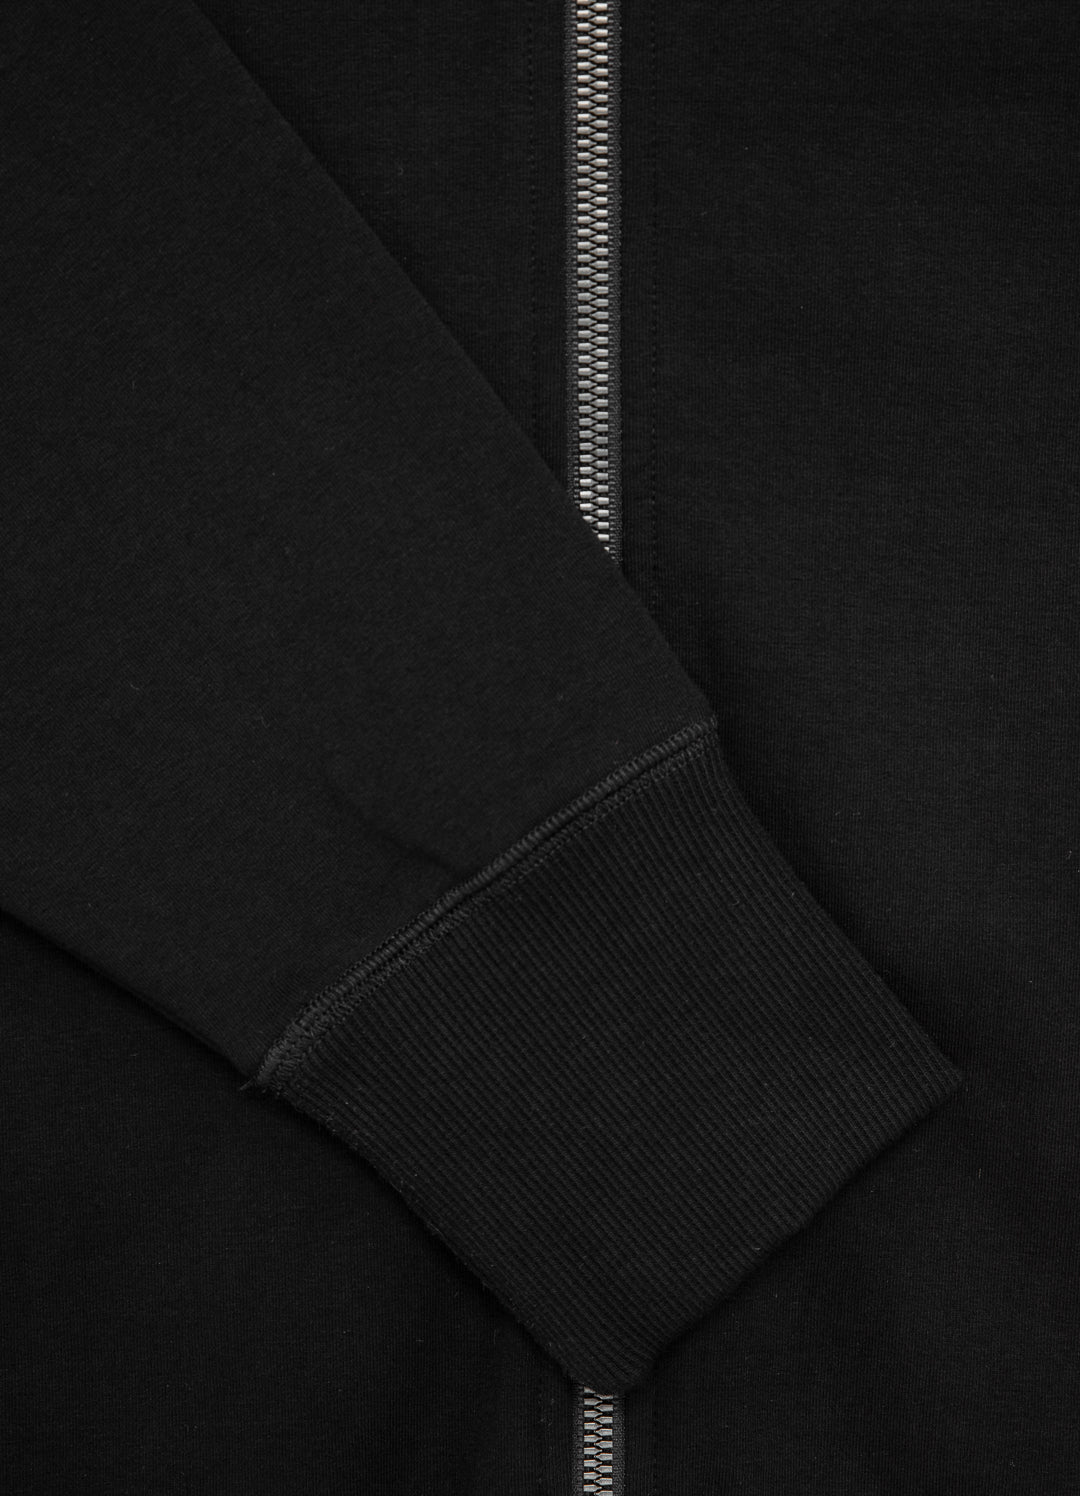 VETTER French Terry Black Sweatjacket.